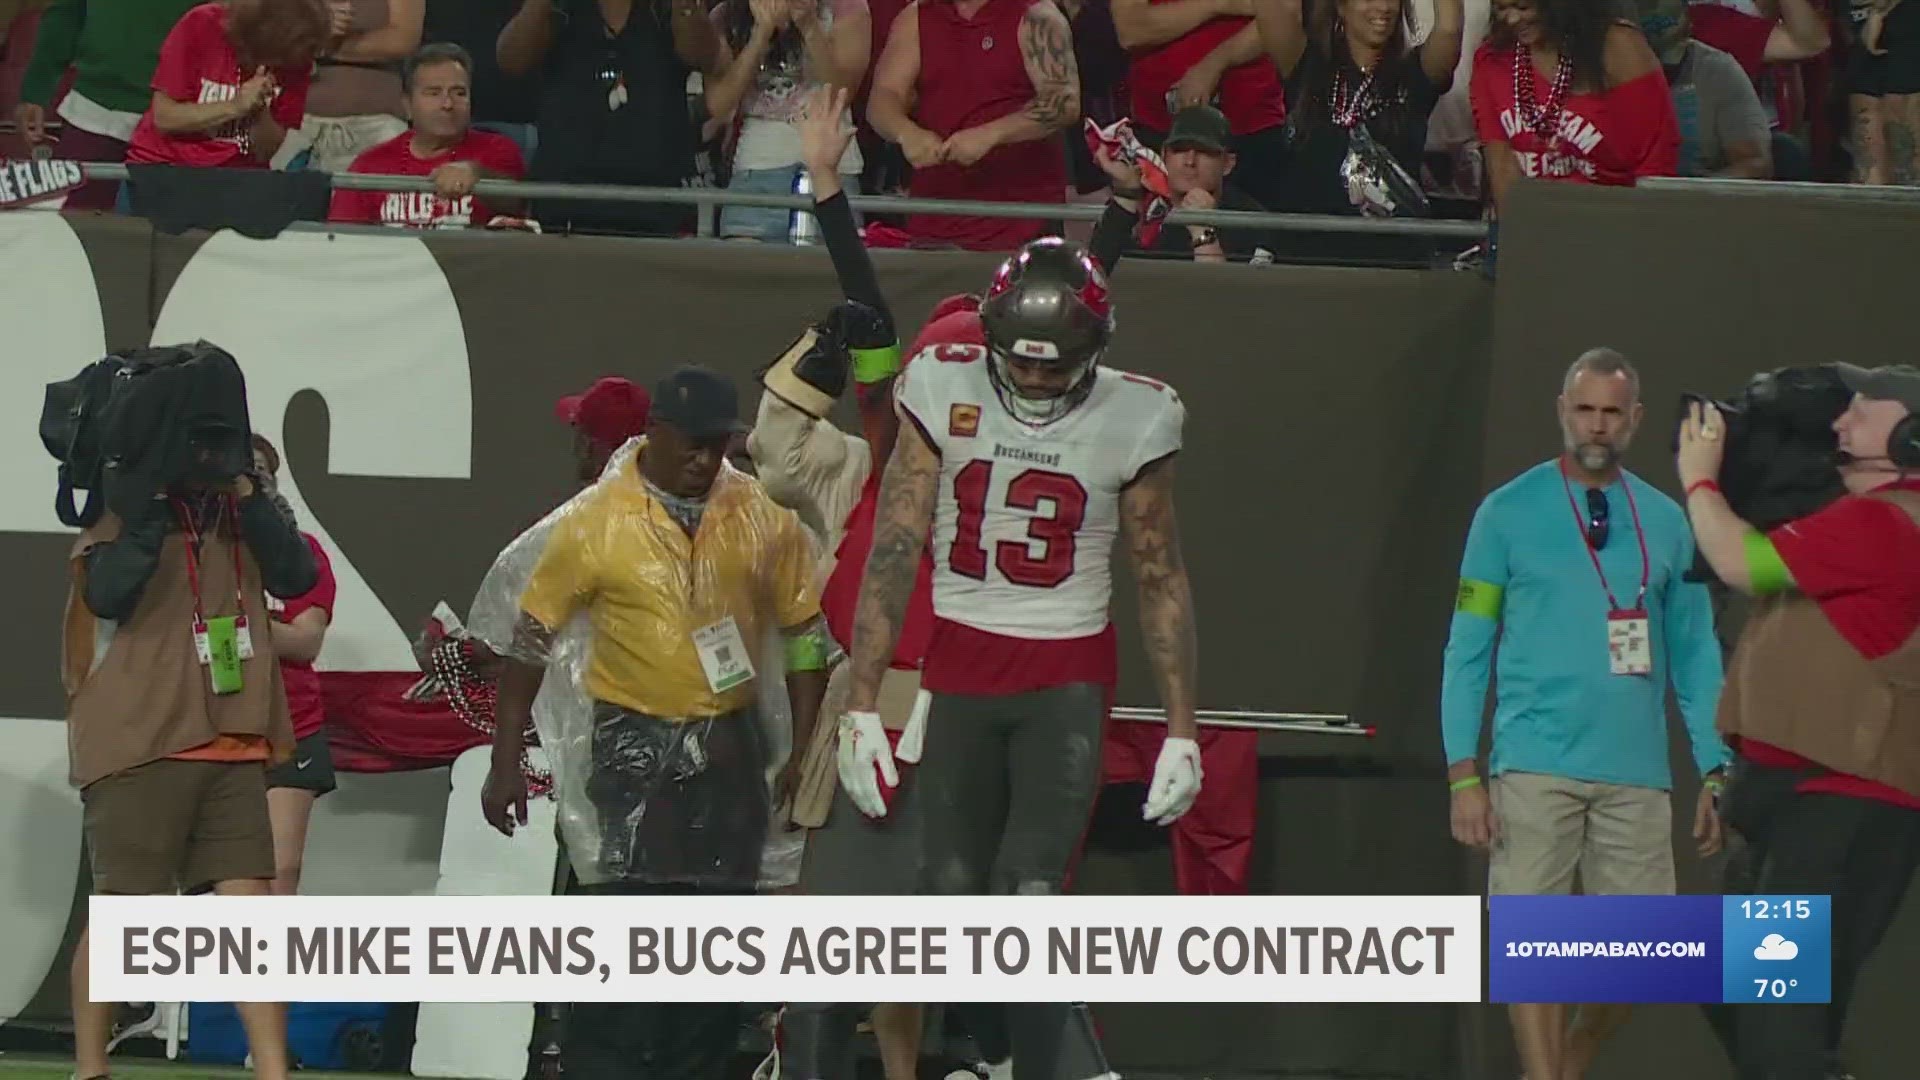 The 2-year contract is worth $52 million. Evans would have become a free agent next week.